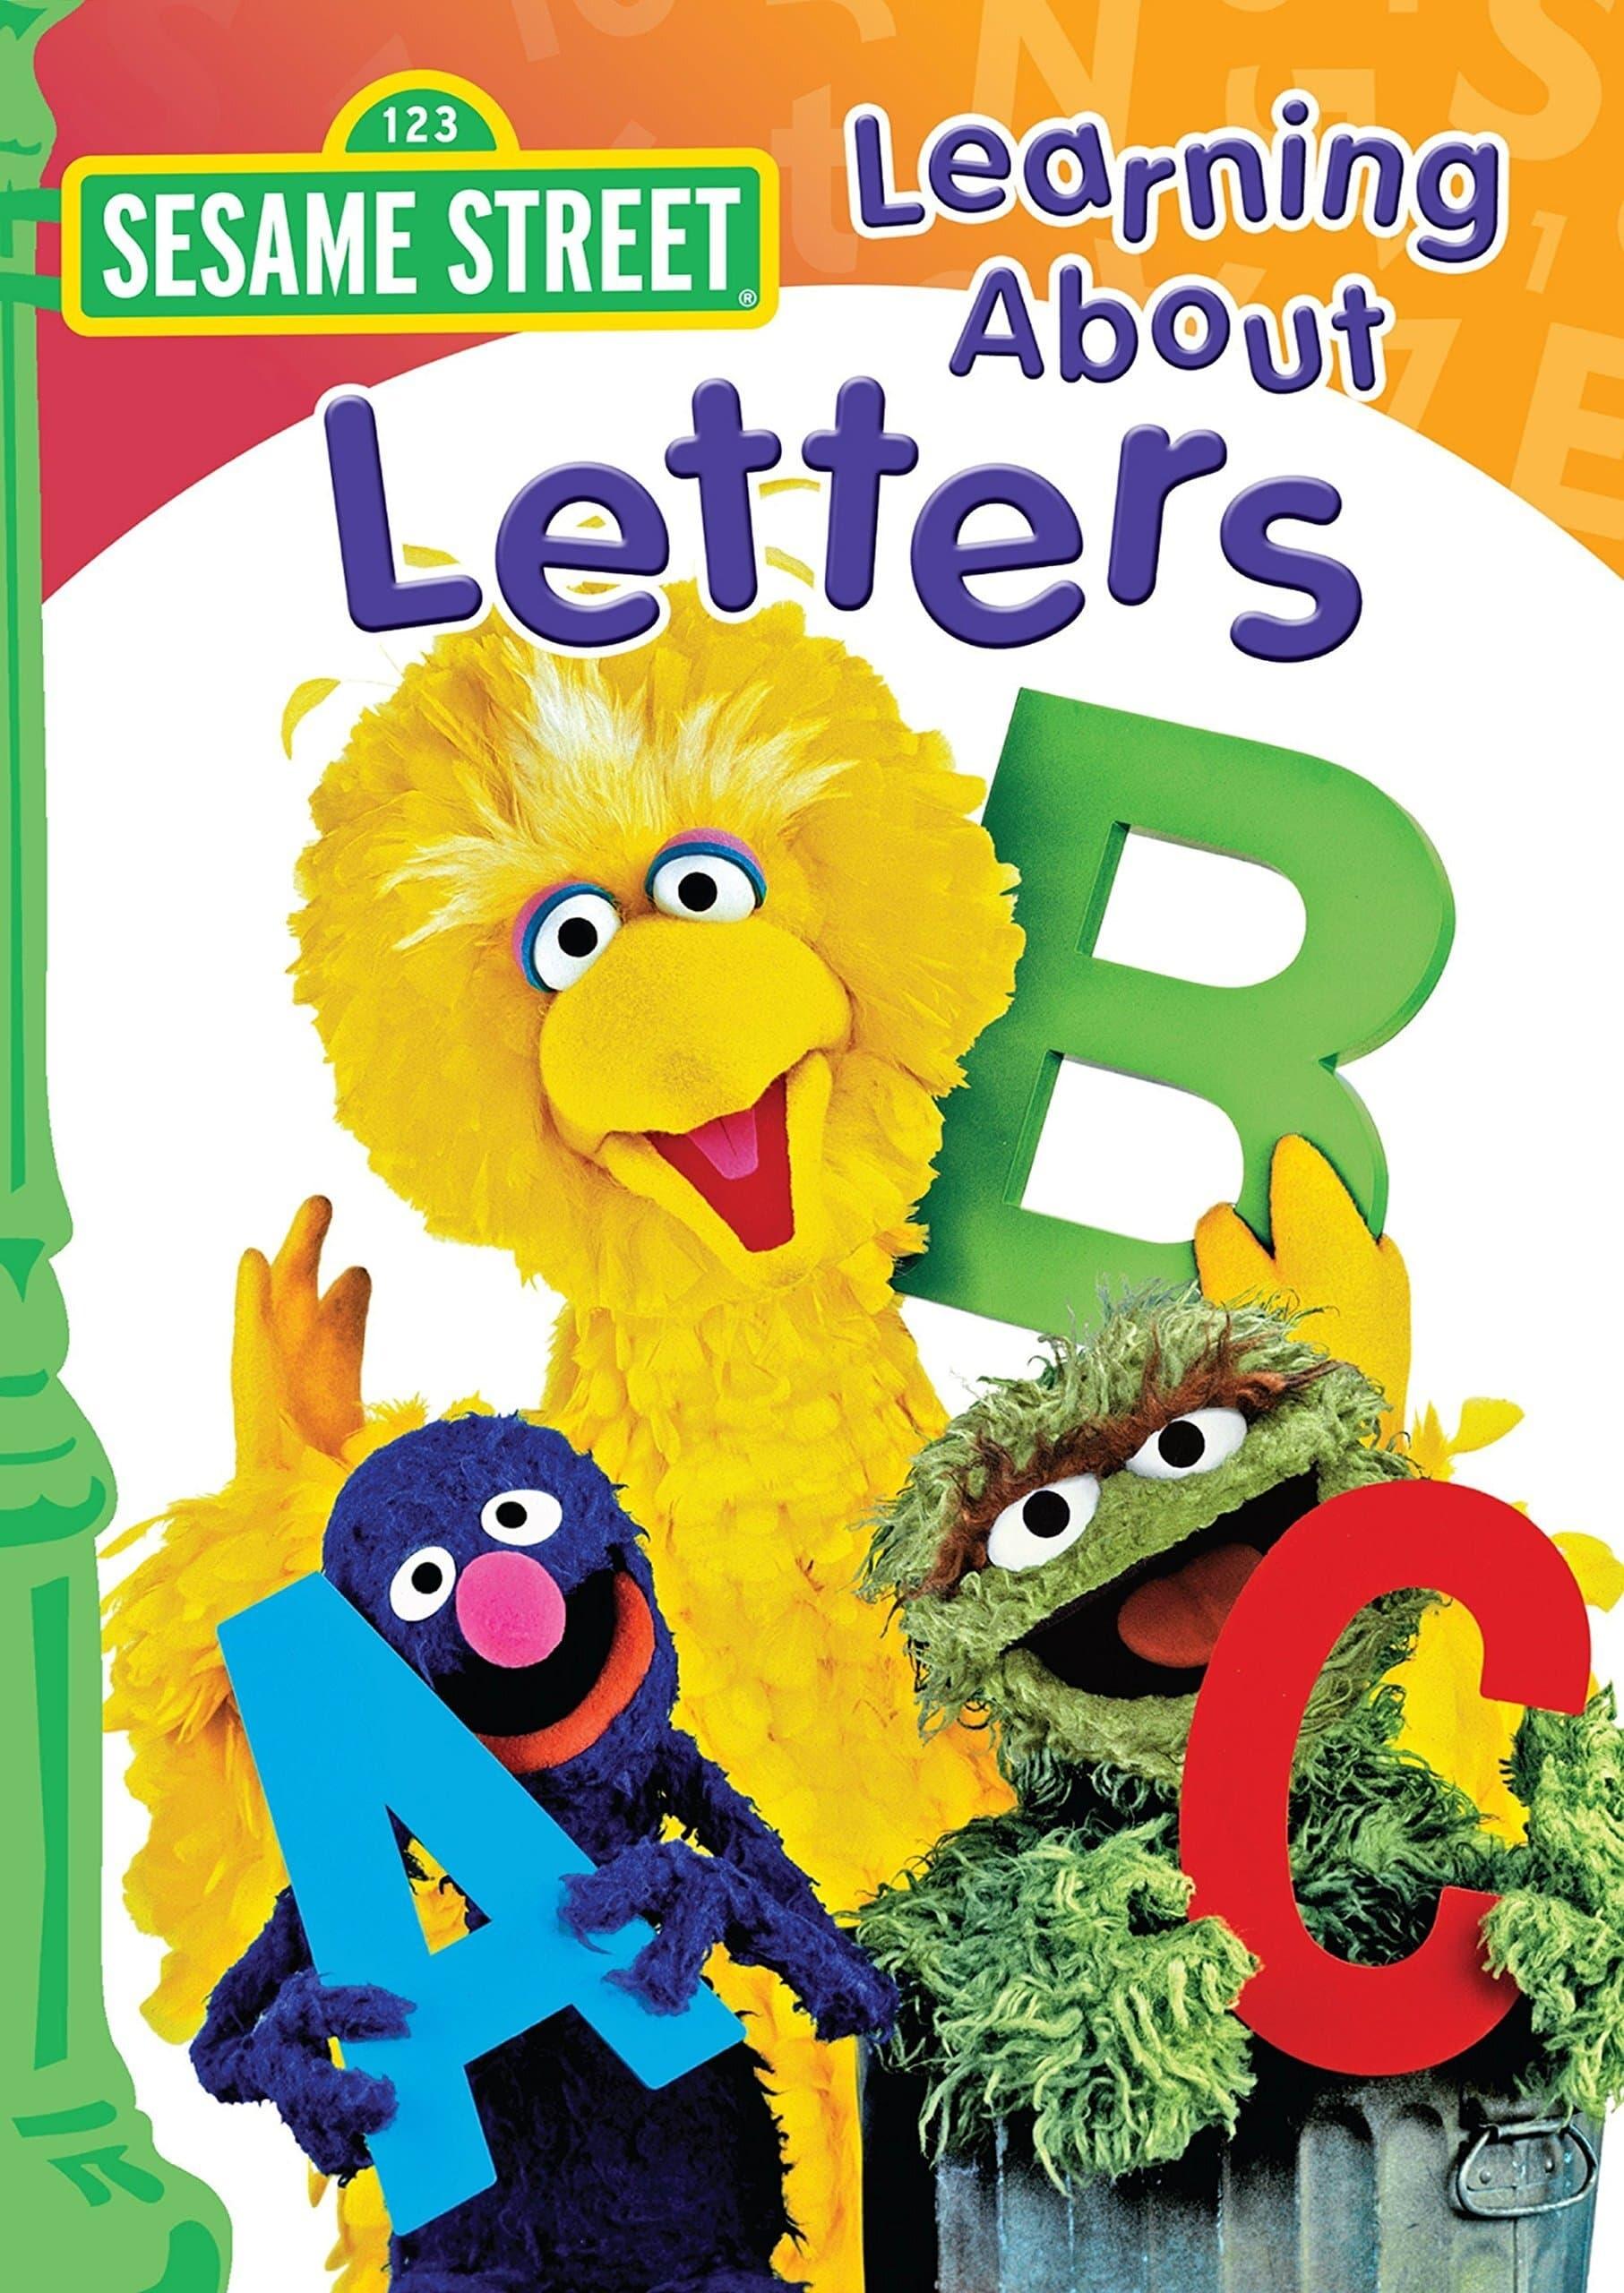 Sesame Street: Learning About Letters poster